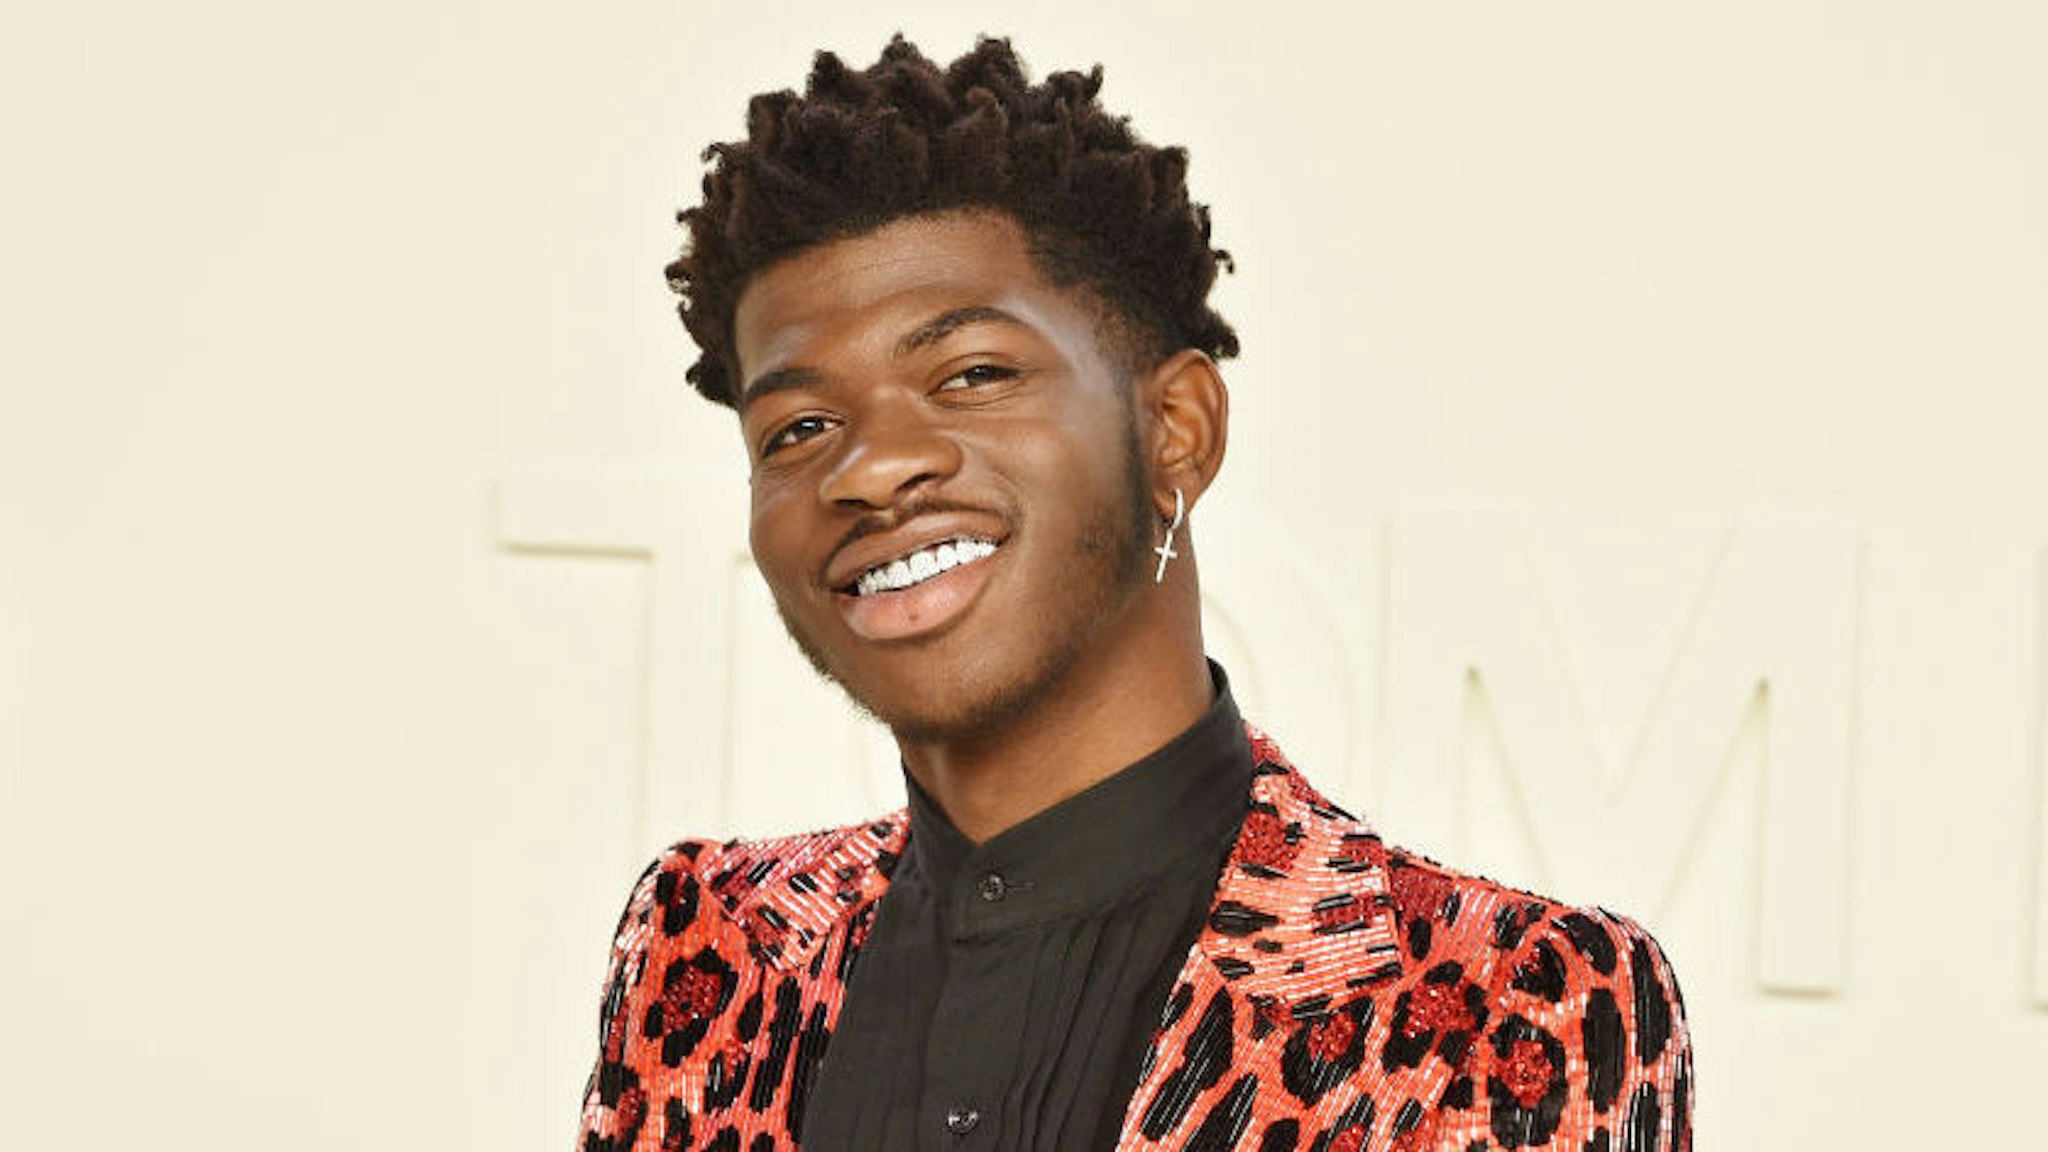 Lil Nas X attends the Tom Ford AW/20 Fashion Show at Milk Studios on February 07, 2020 in Los Angeles, California.